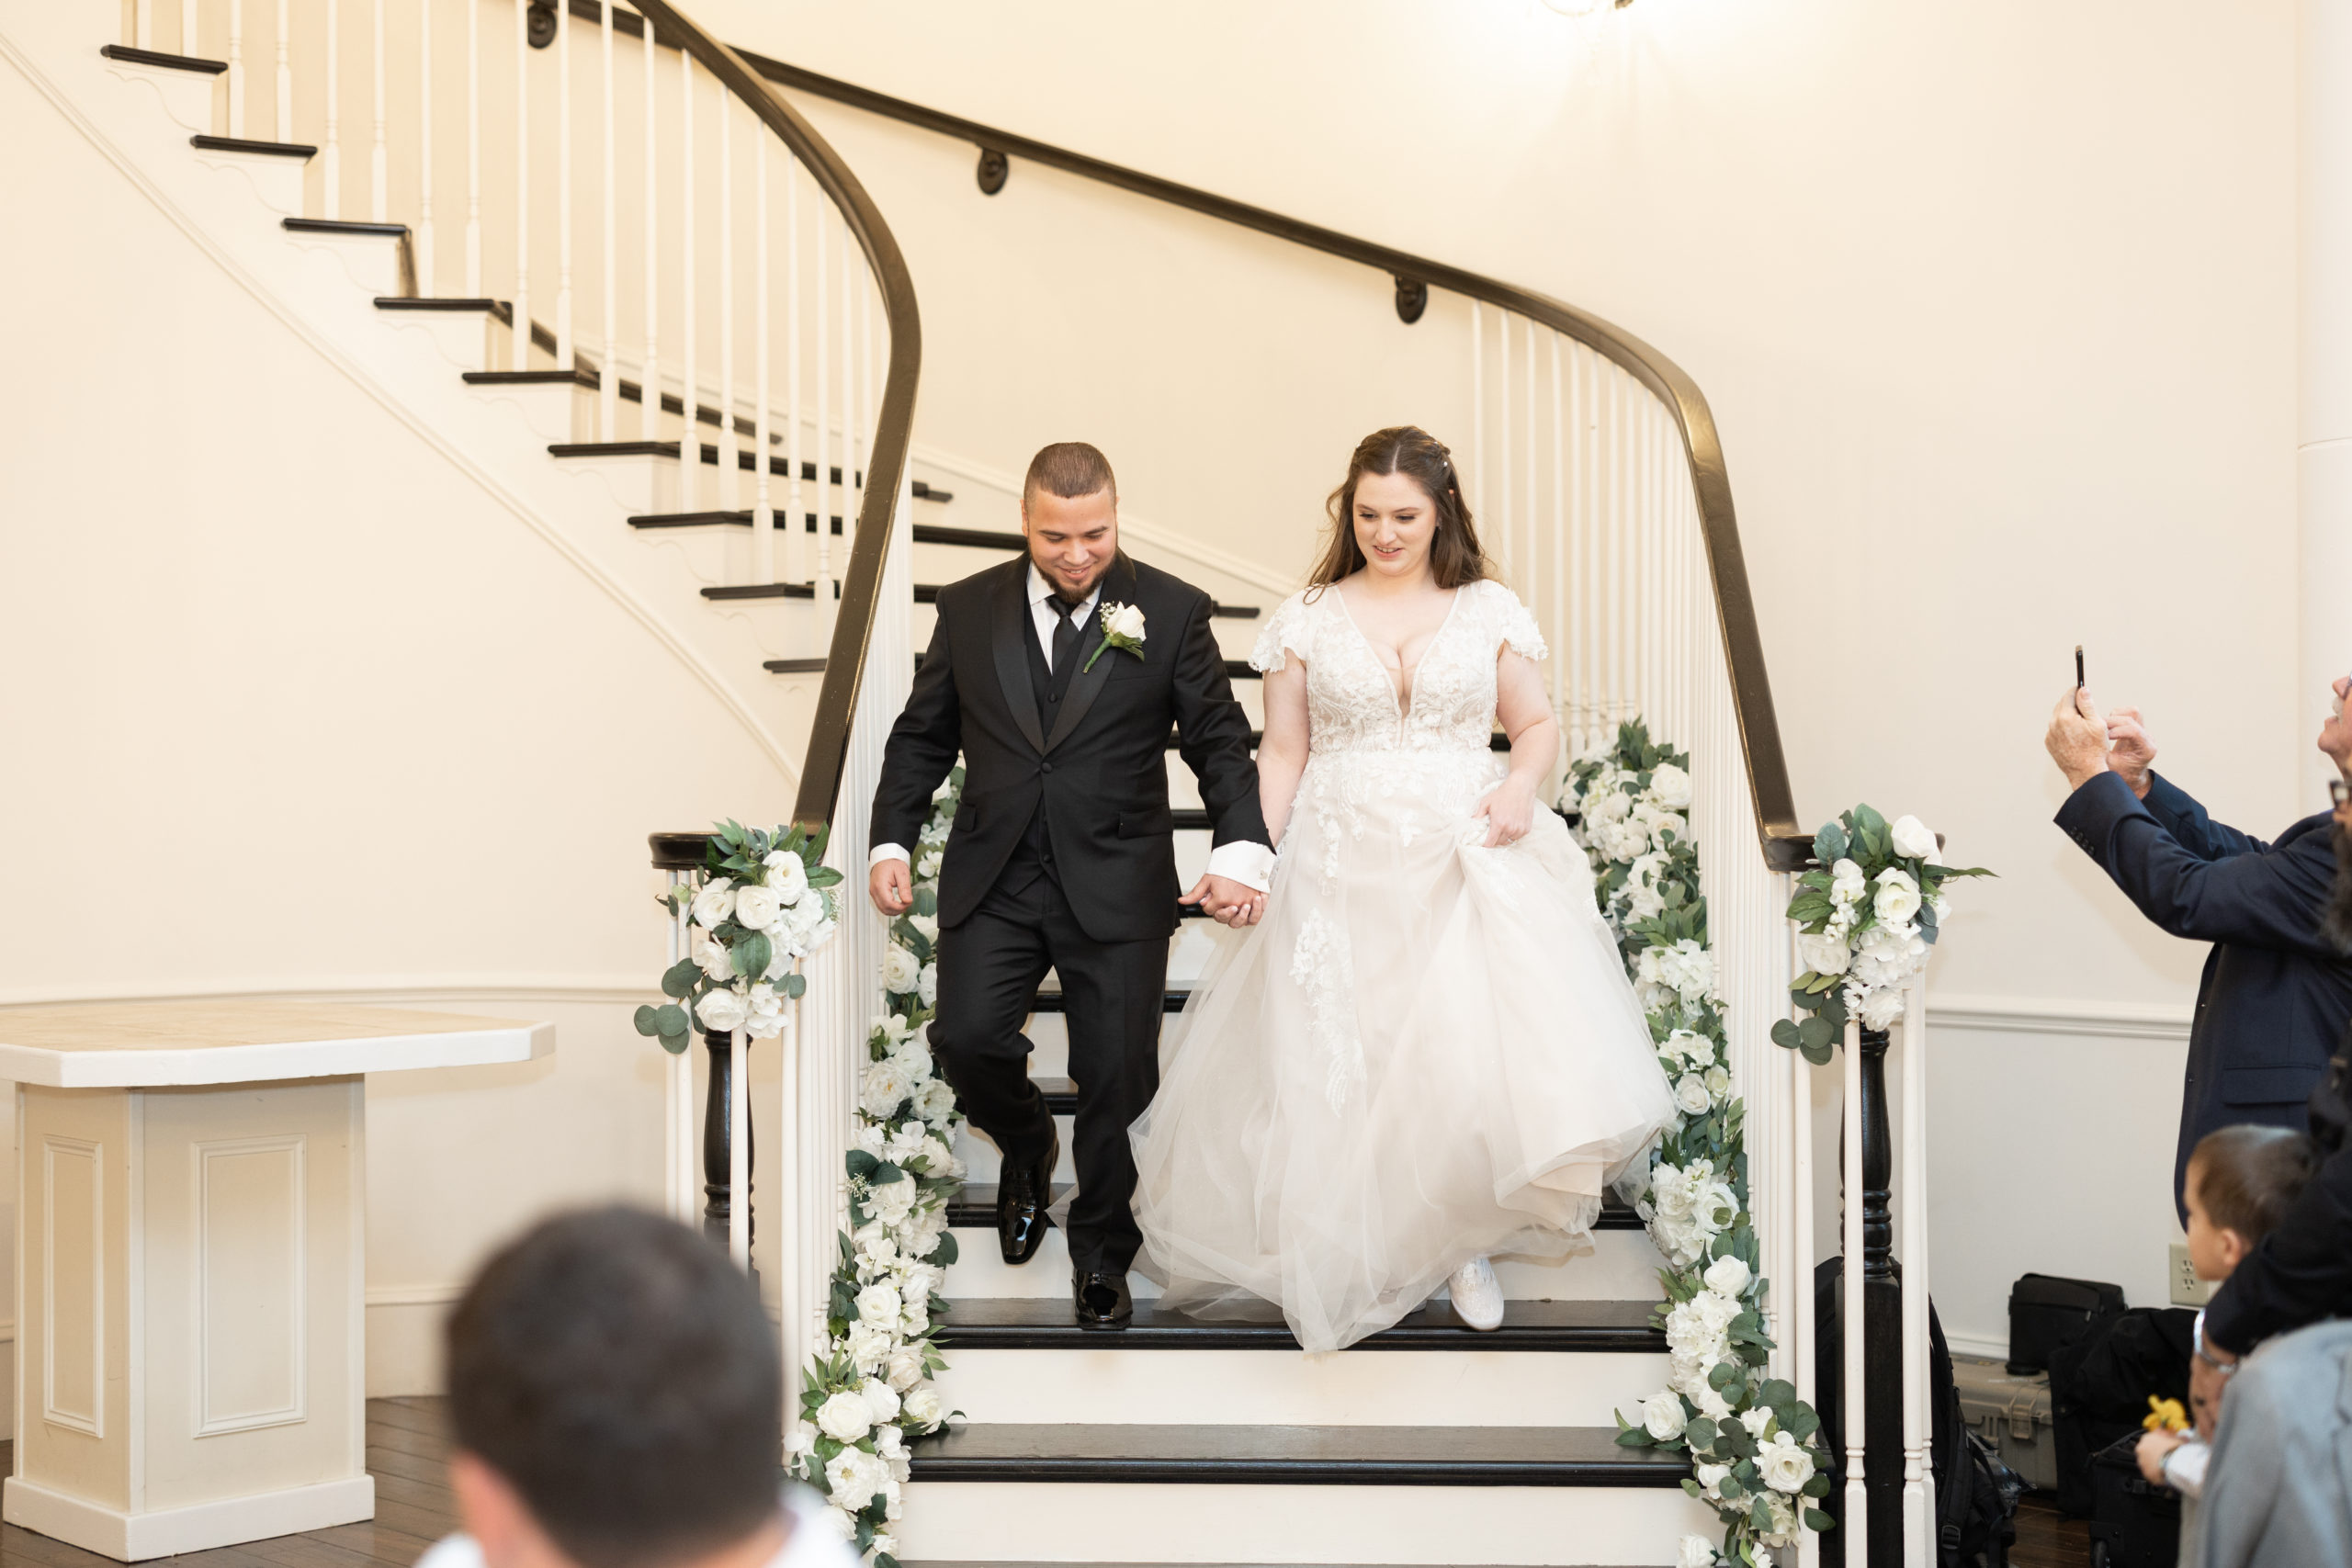 Bride and groom grand entrance down winding staircase